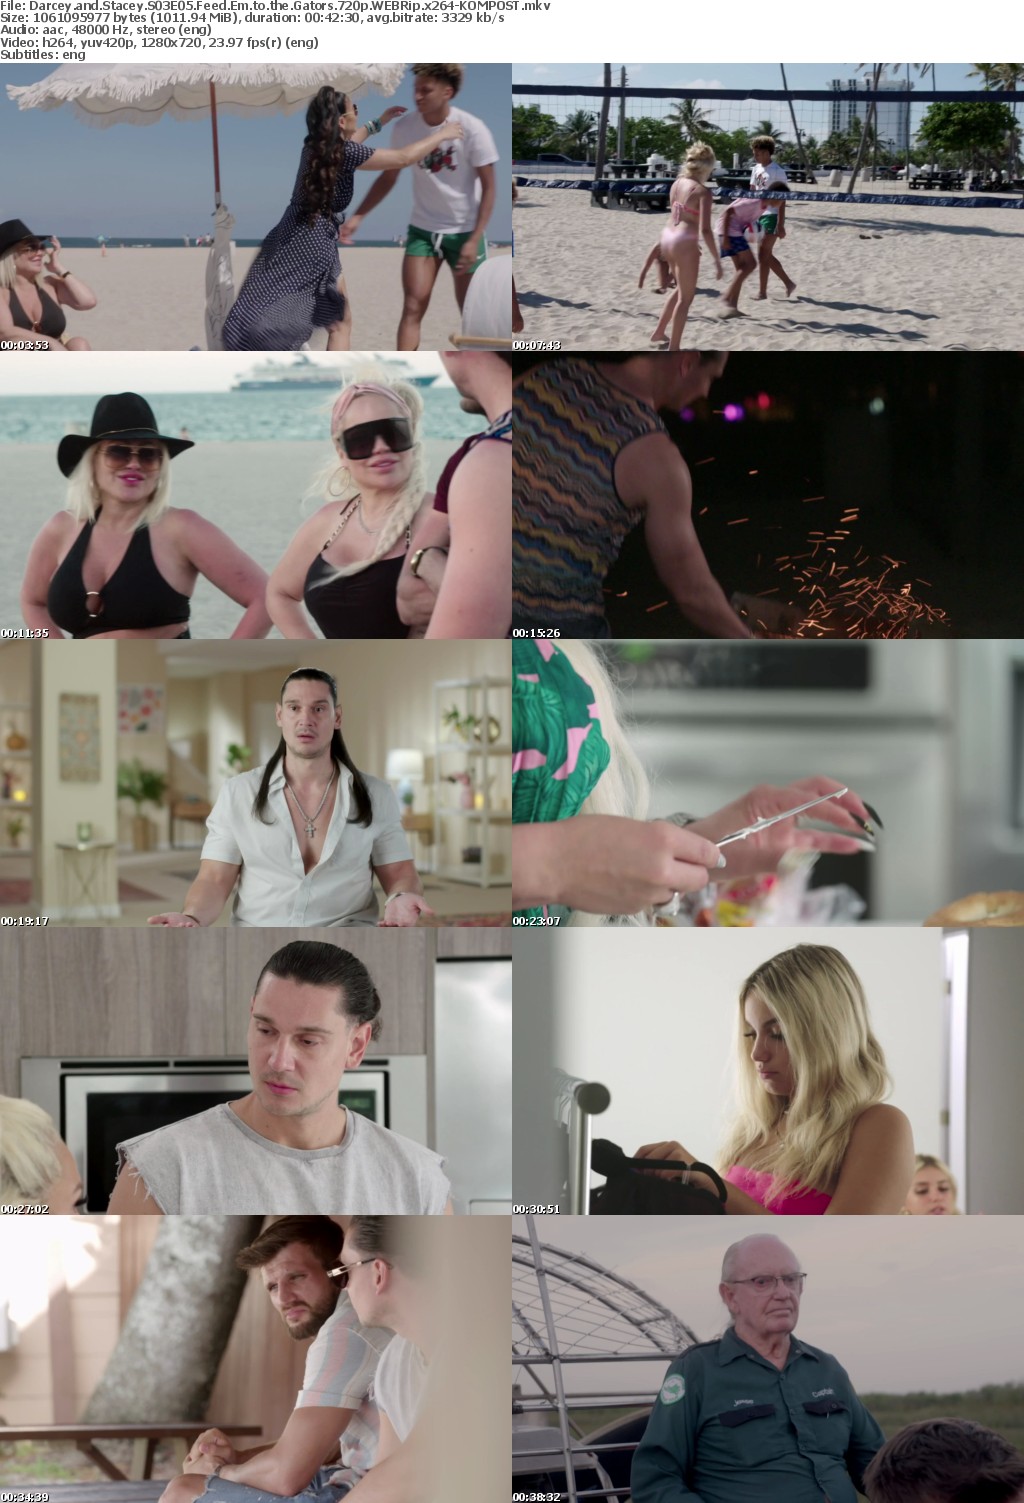 Darcey and Stacey S03E05 Feed Em to the Gators 720p WEBRip x264-KOMPOST